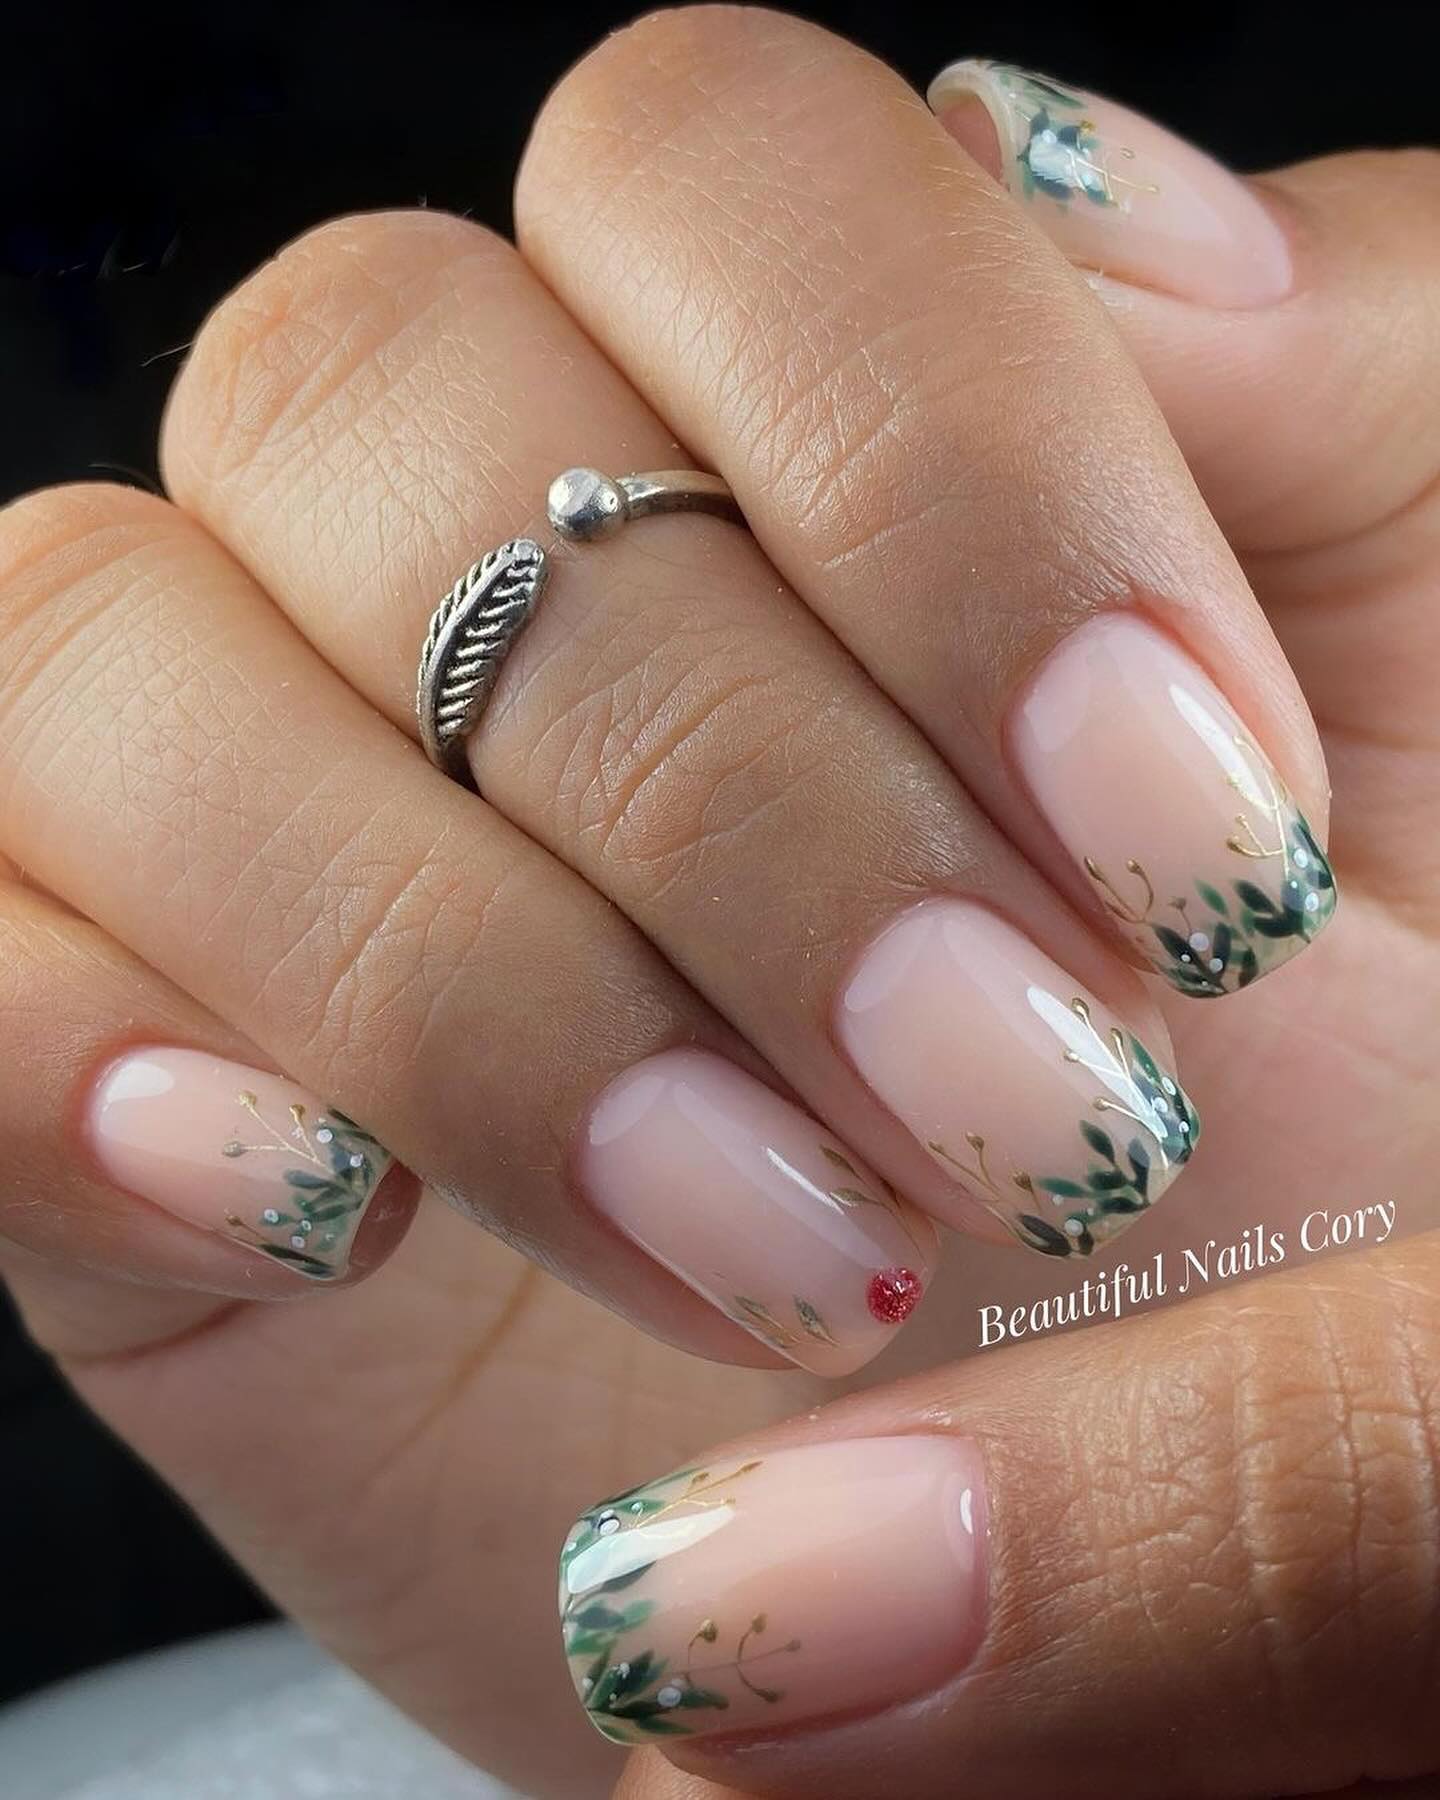 100 Of The Best Spring Inspired Nail Designs images 96